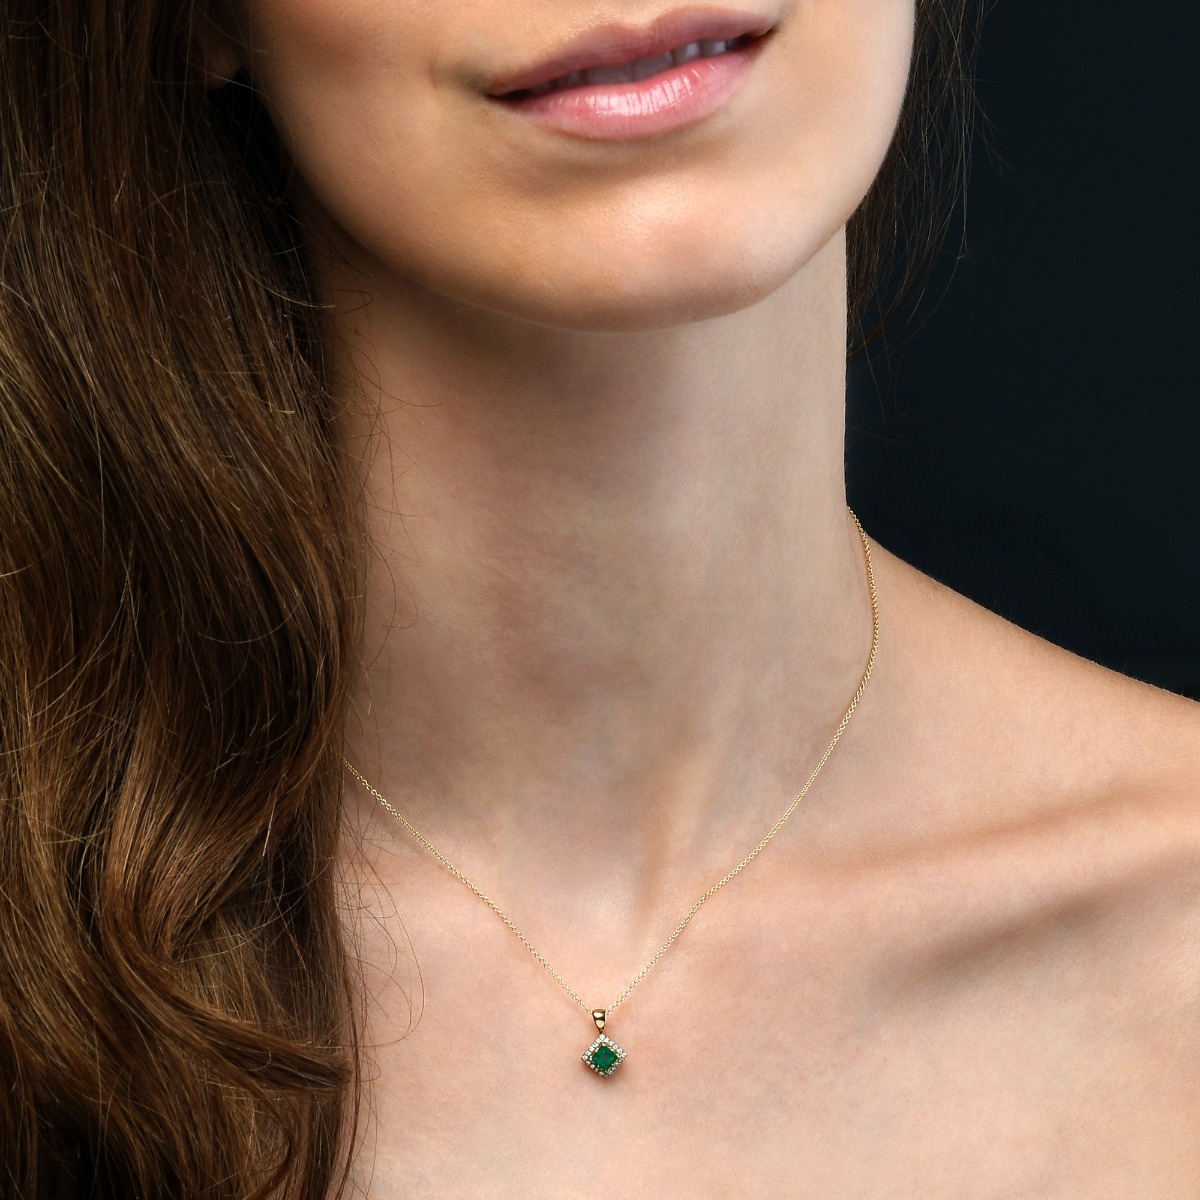 Amazon.com: Peora Created Emerald with Genuine Diamond Pendant in 14K White  Gold, Elegant Solitaire, Oval Shape, 10x8mm, 2.35 Carats total : Peora:  Clothing, Shoes & Jewelry